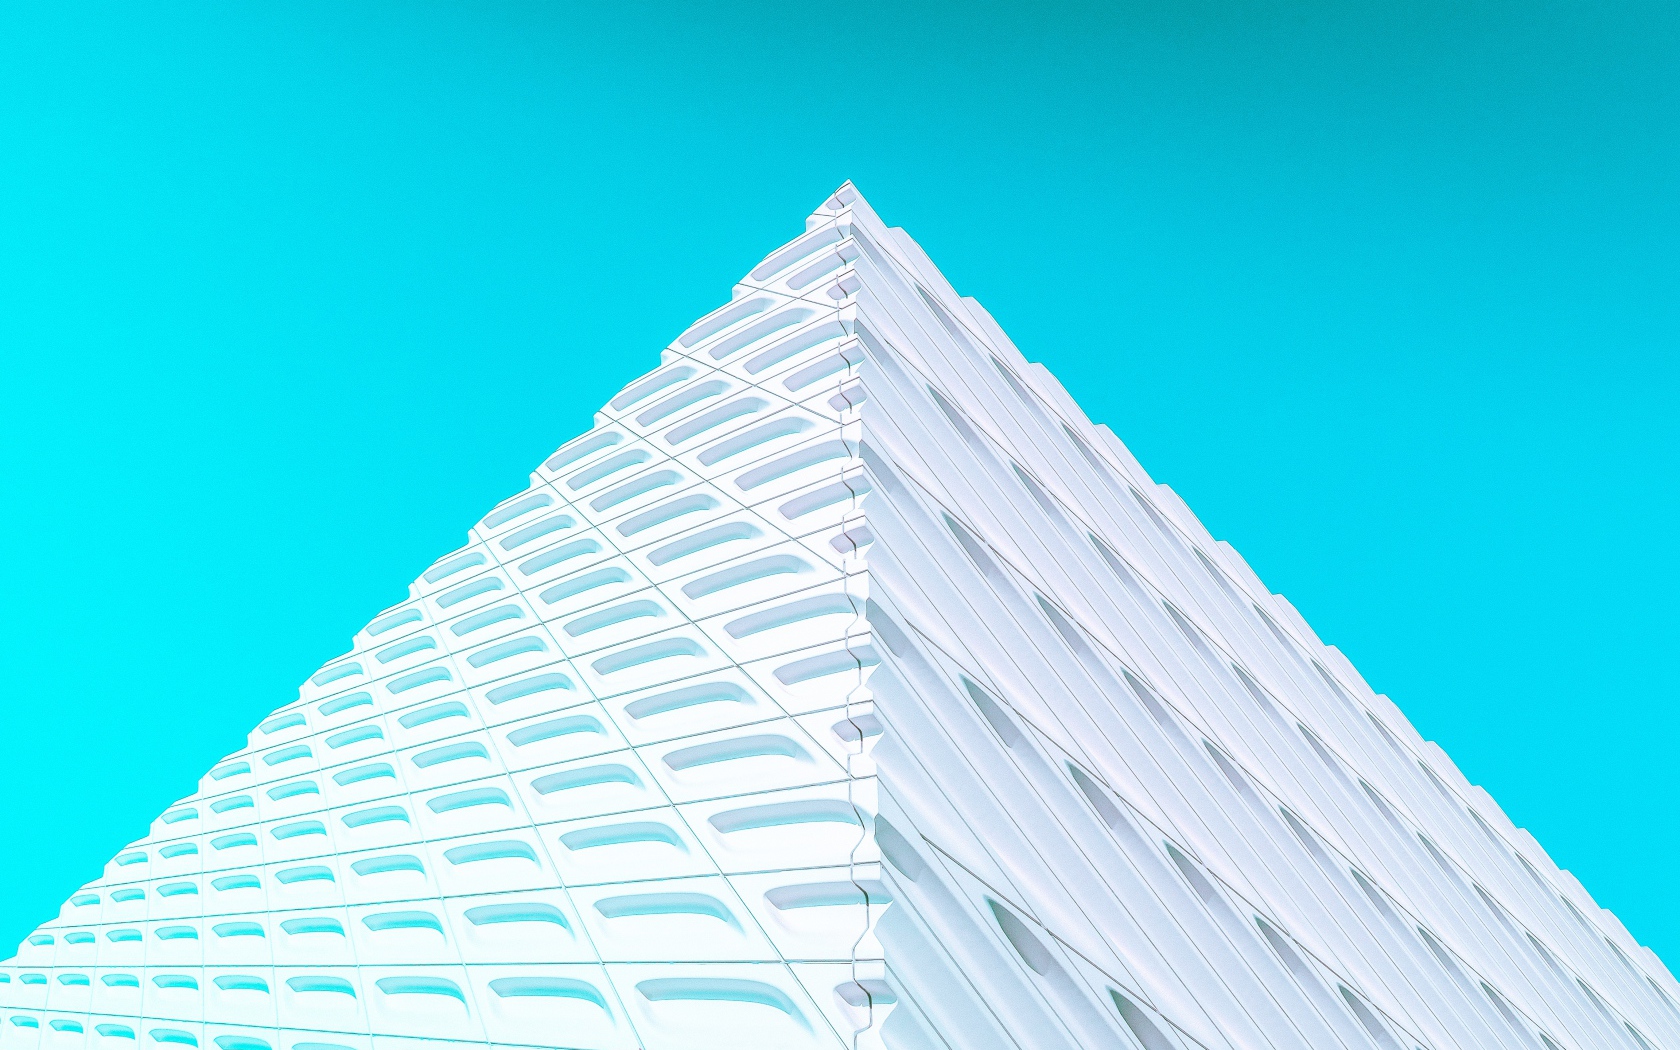 3d pyramid on a blue background